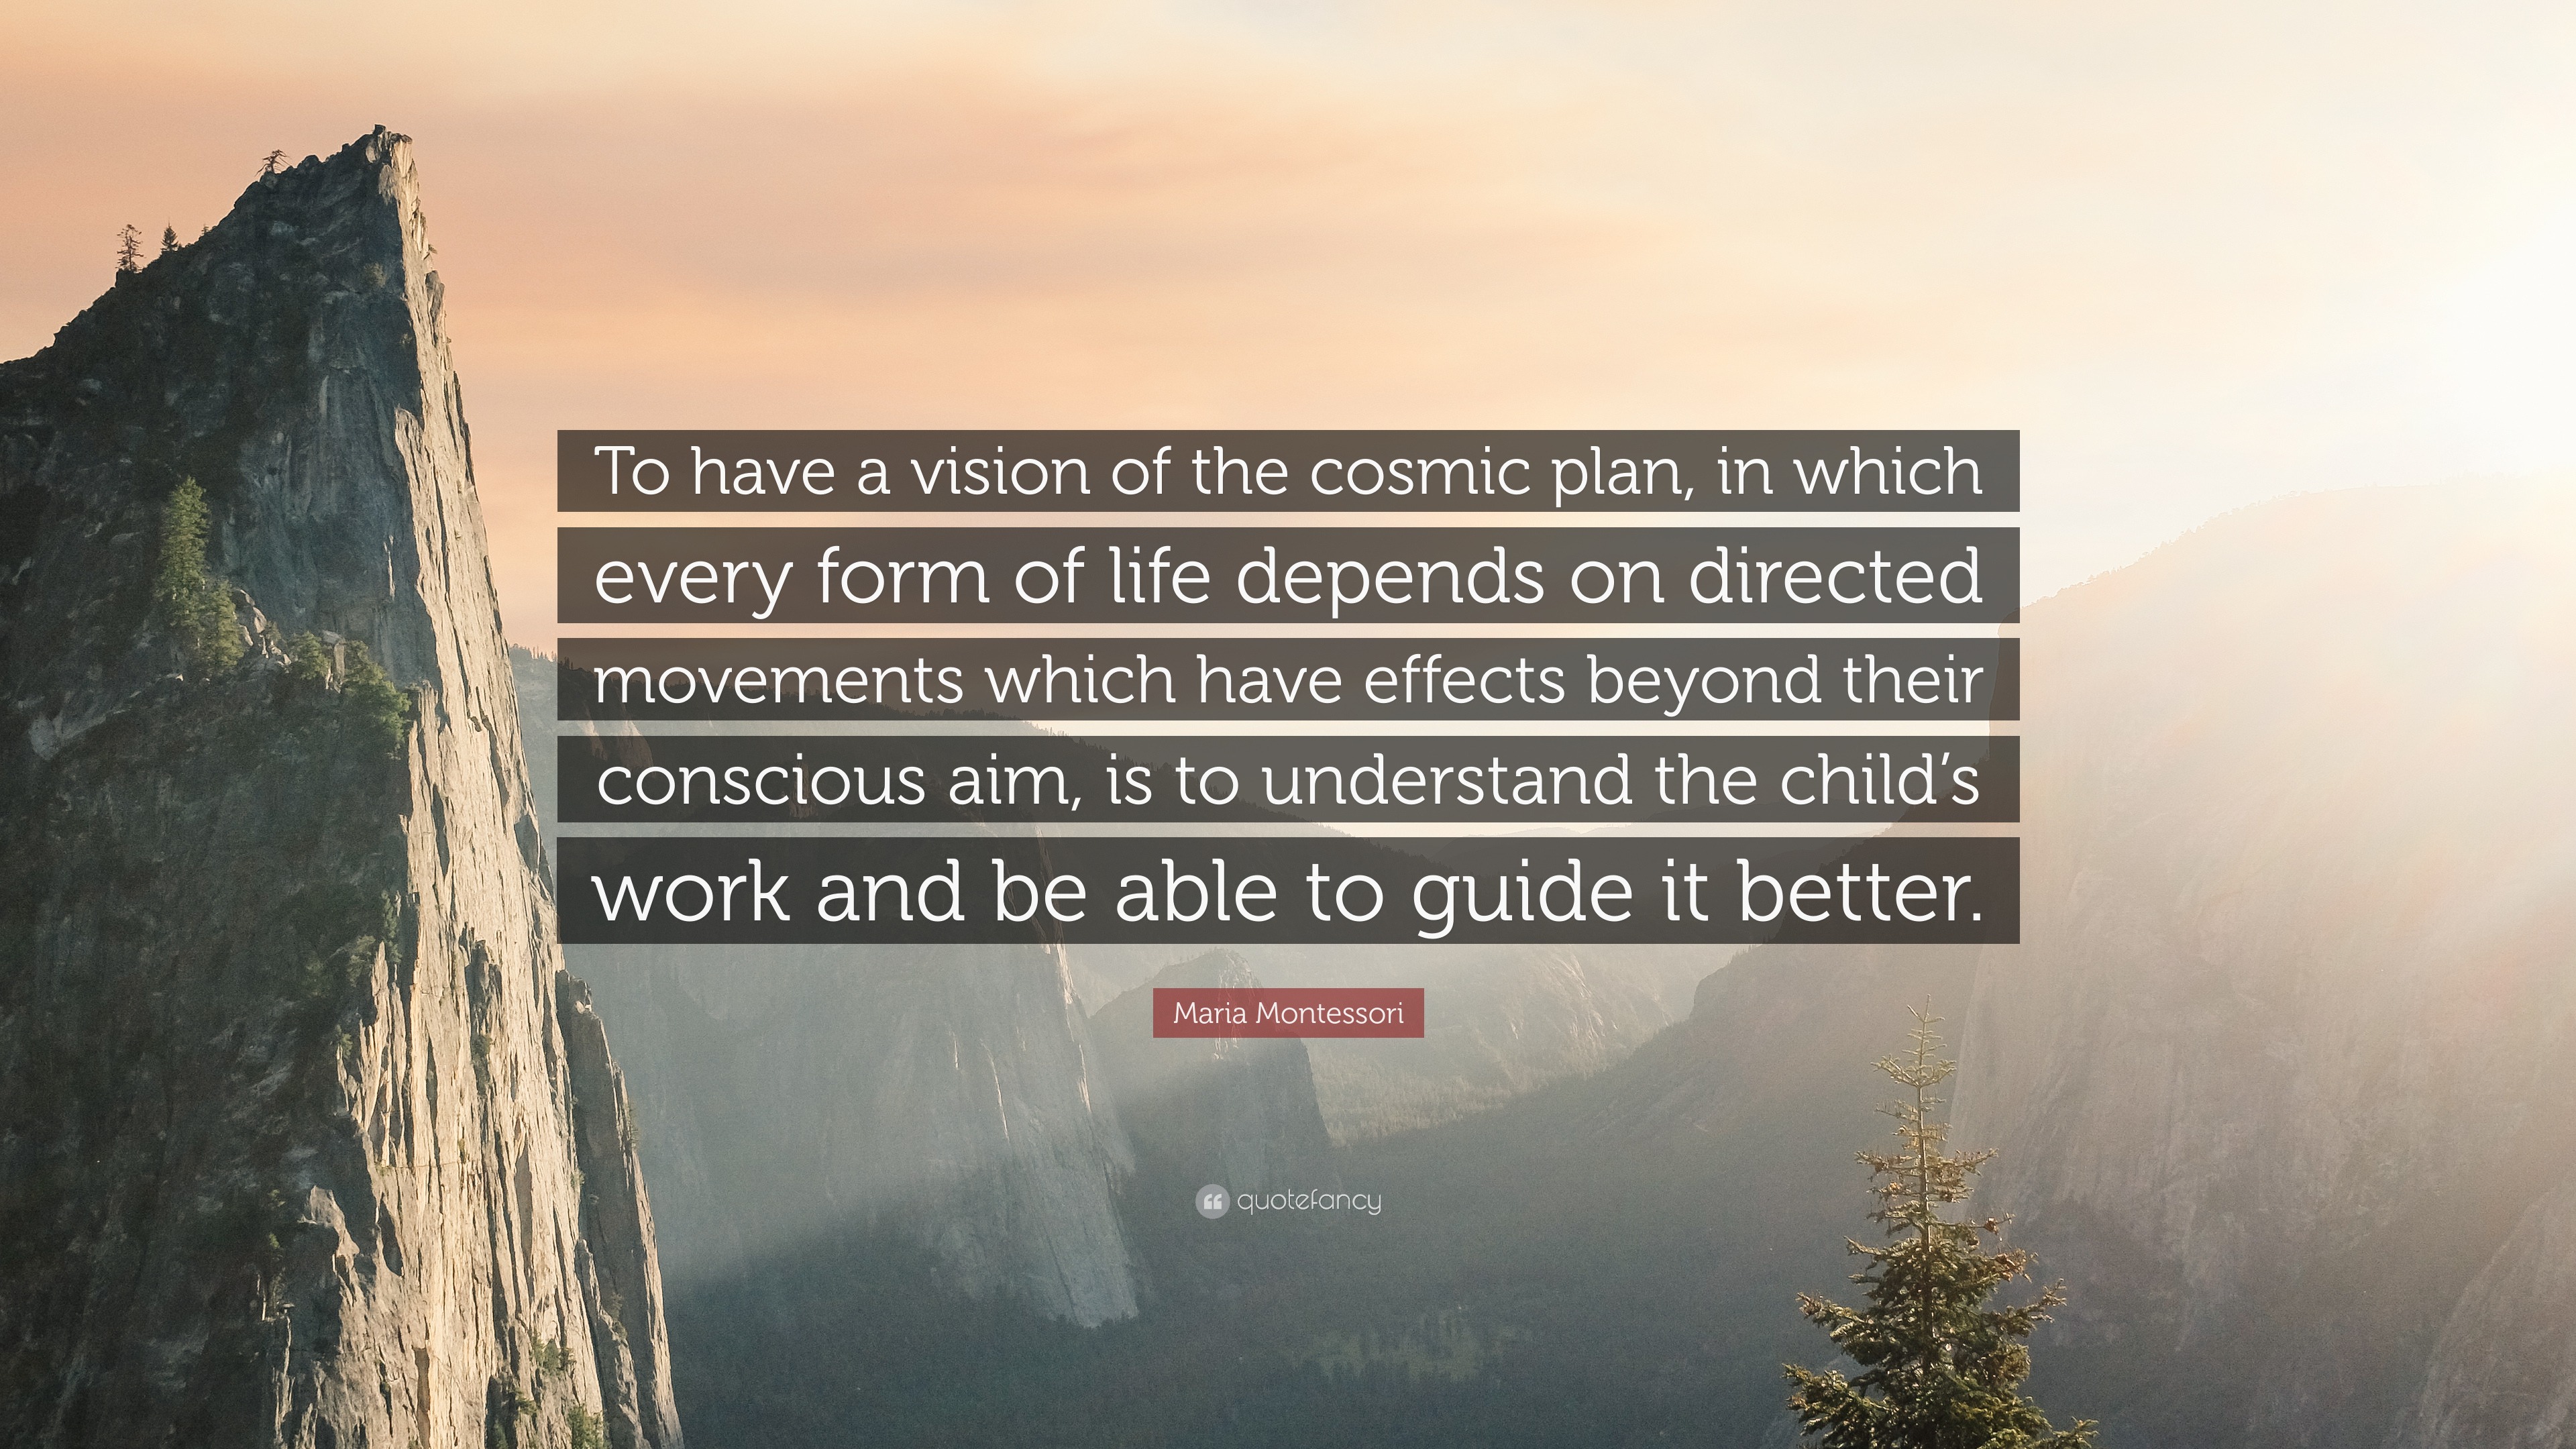 Maria Montessori Quote “to Have A Vision Of The Cosmic Plan In Which